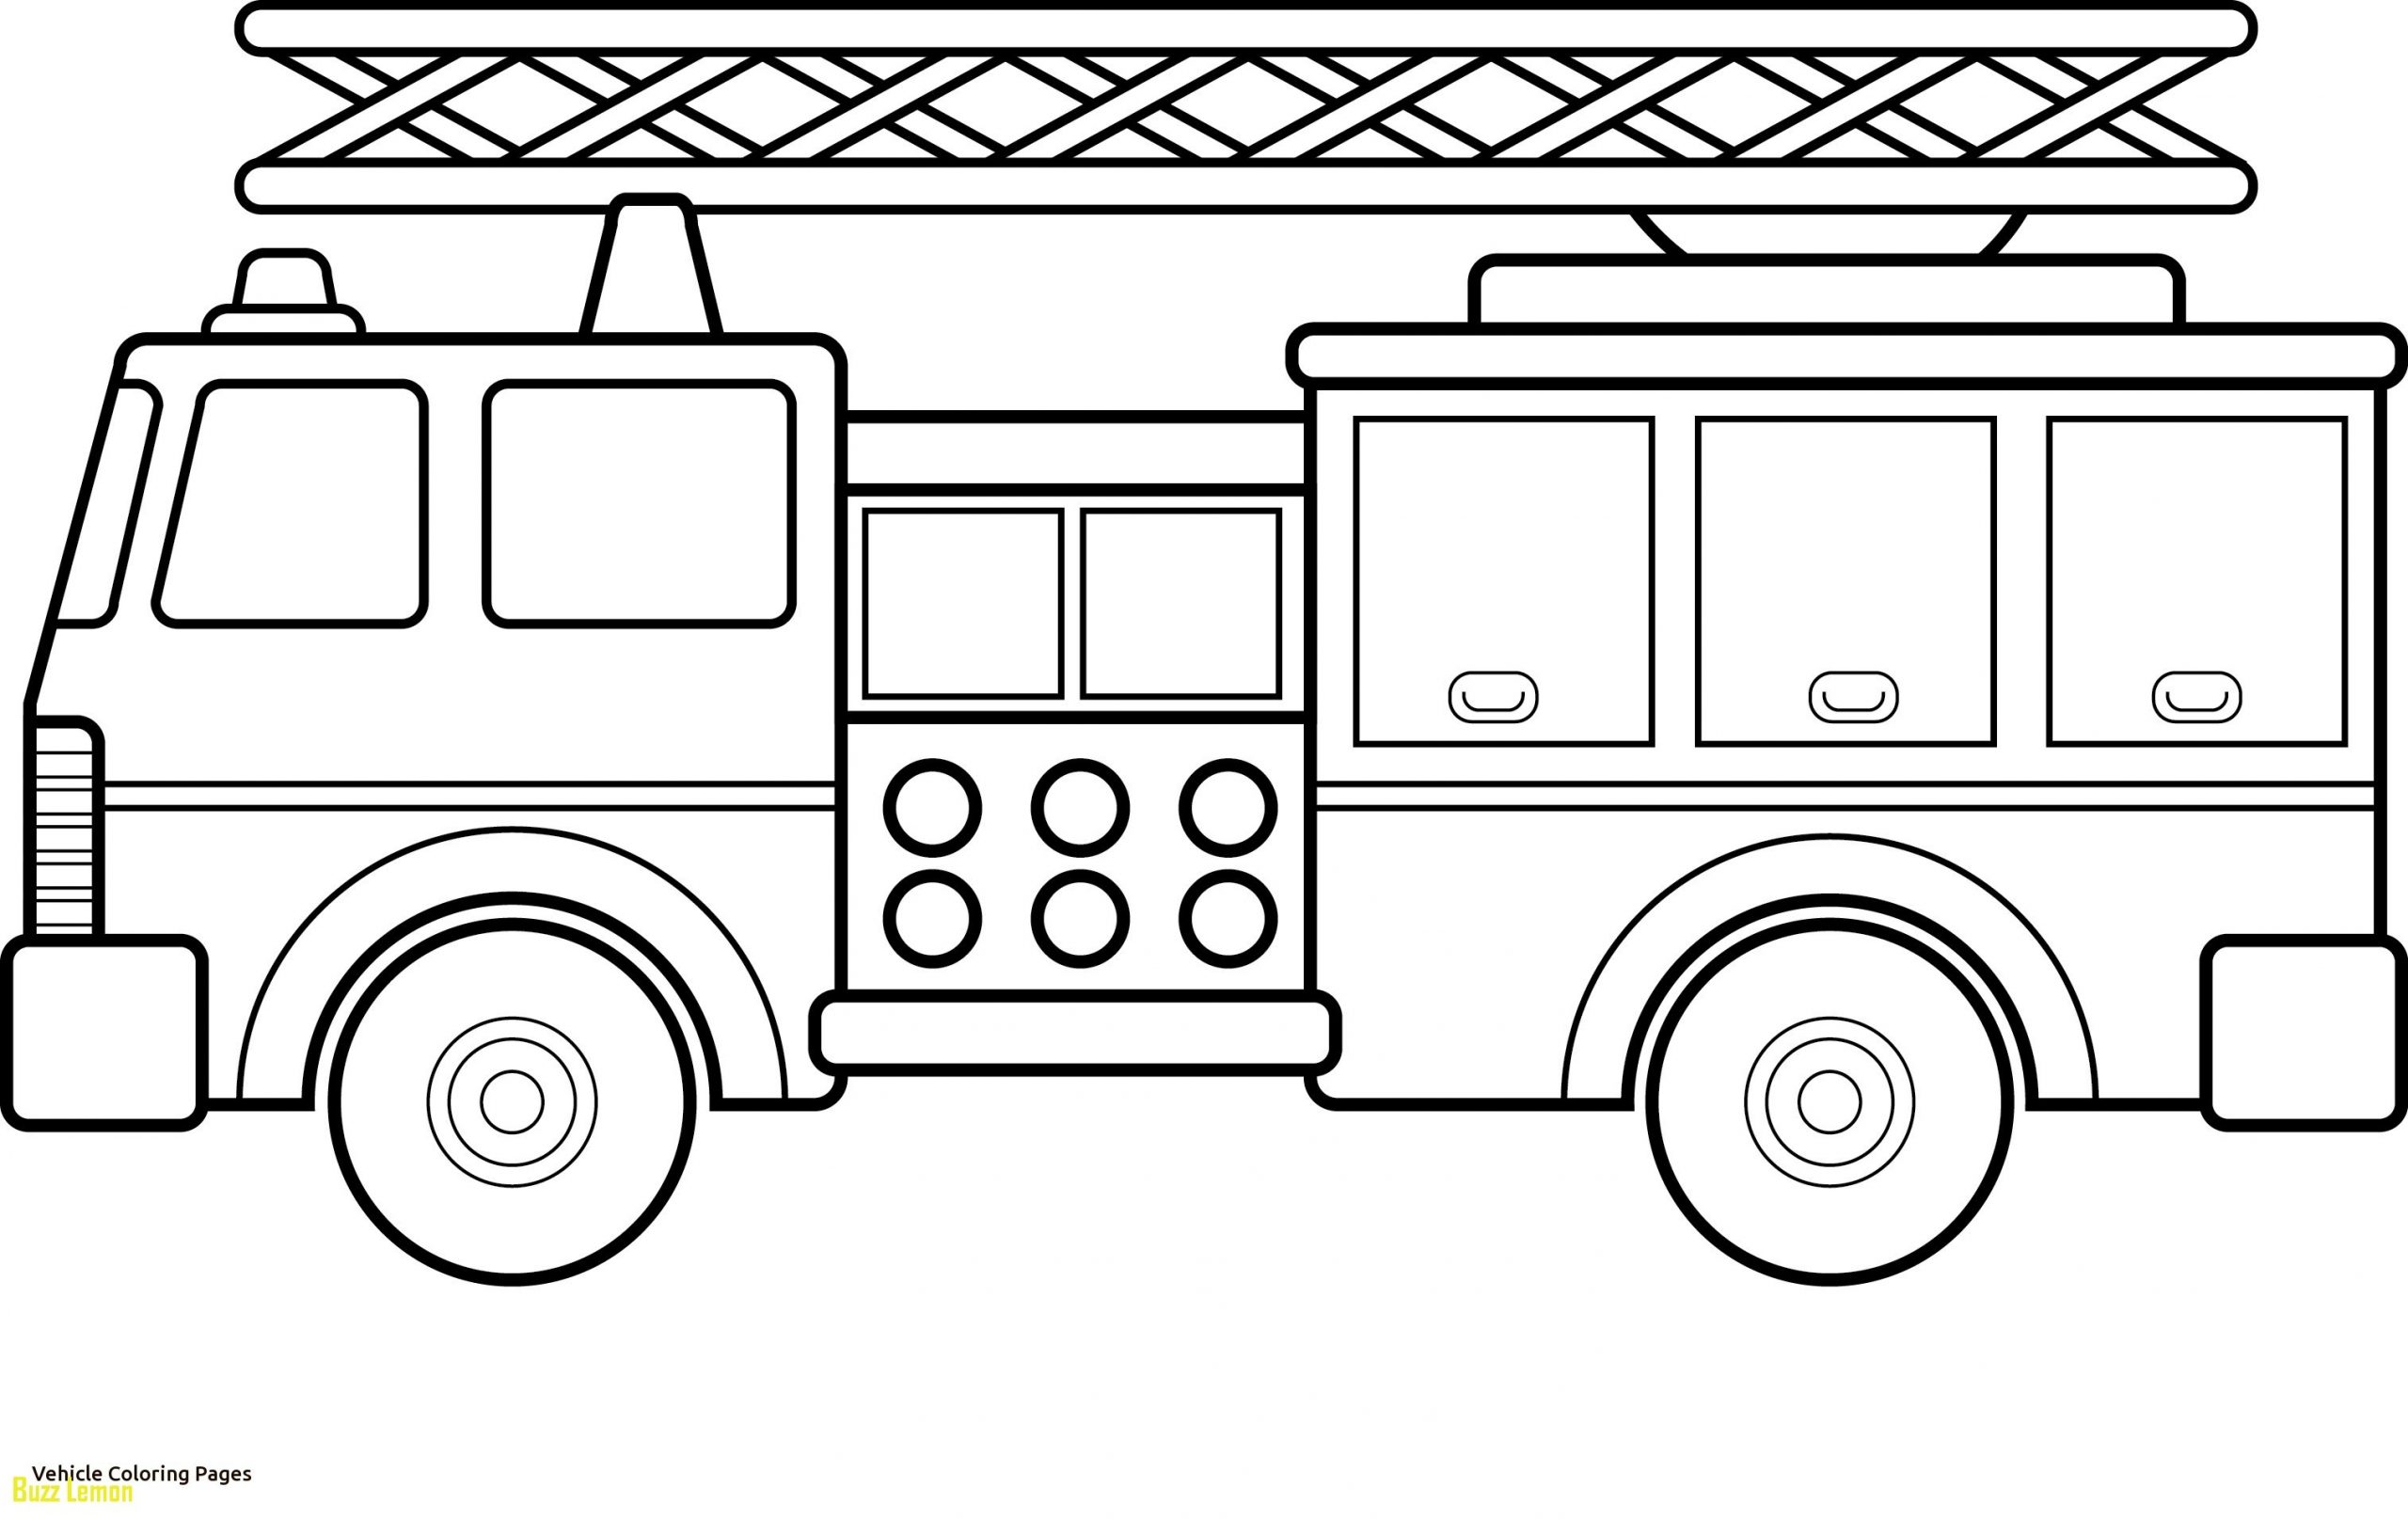 Rescue Vehicles coloring pages Beautiful Coloring Page Vehicles Inspirational Truck Coloring Pages Beautiful para colorir